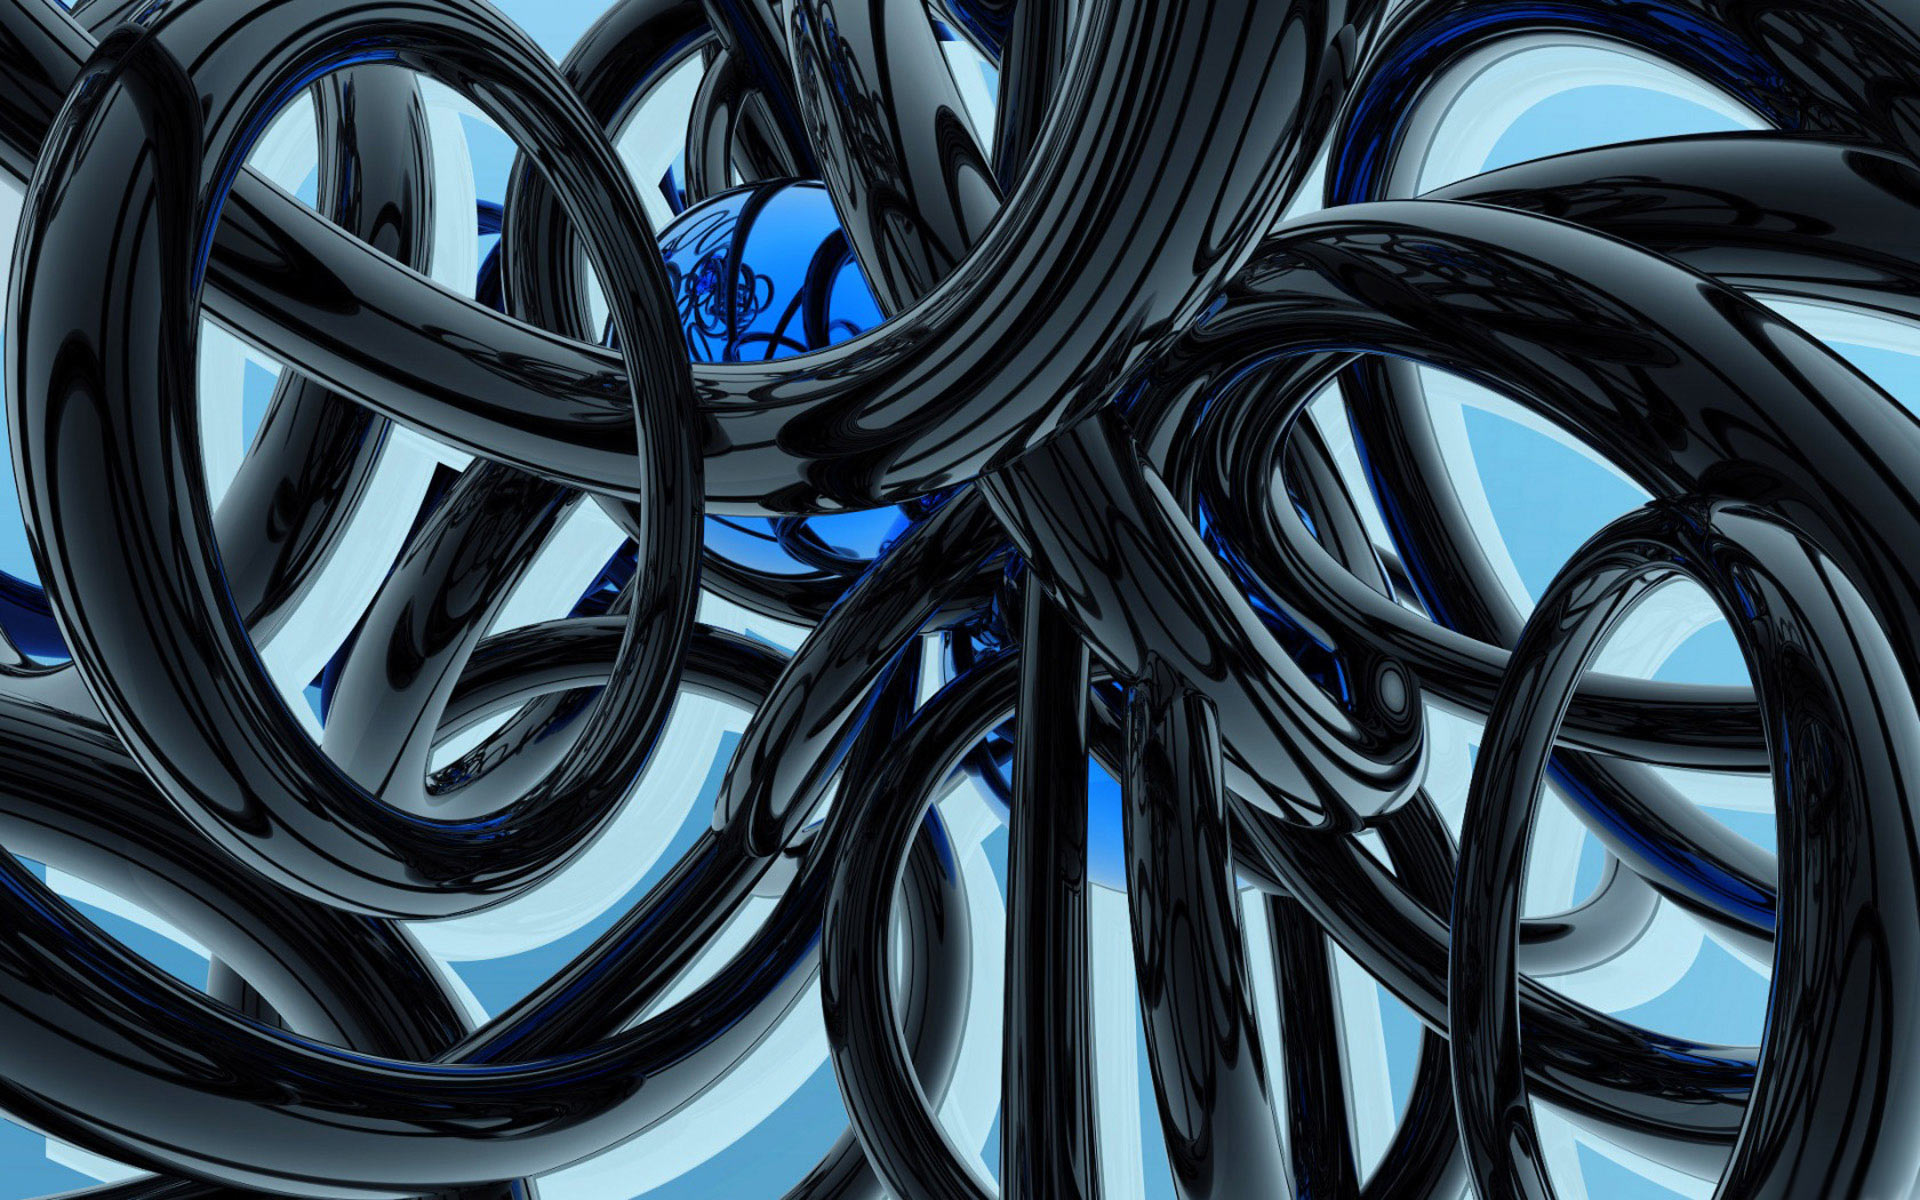 3d Abstract HD Wallpaper And Make This For Your Desktop